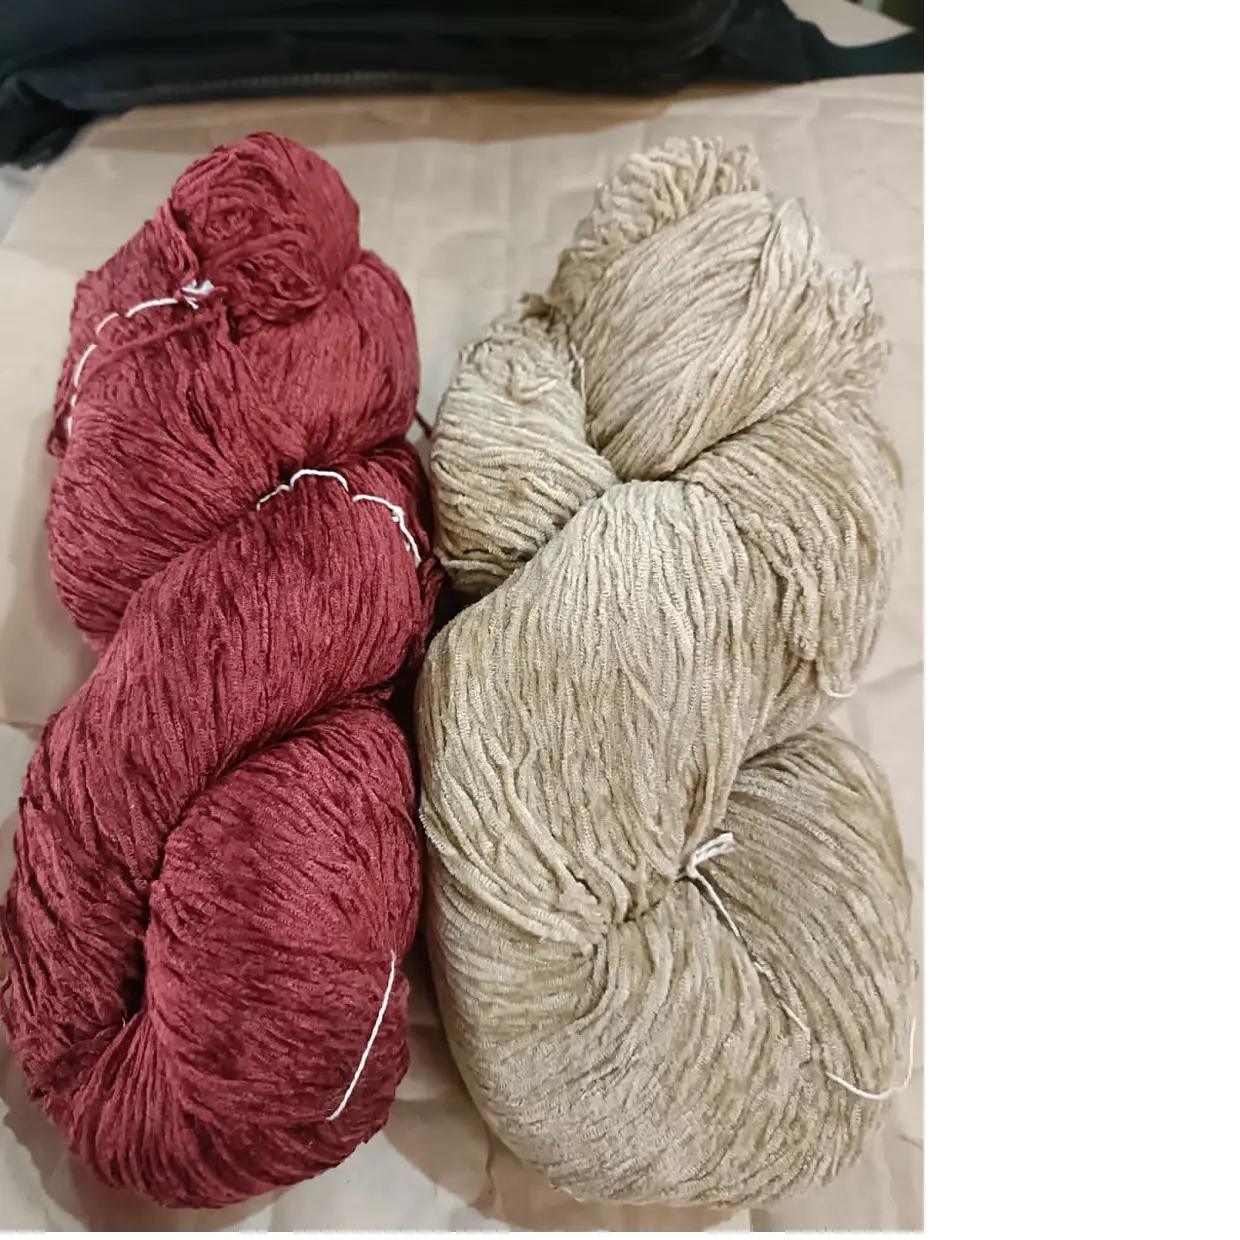 100% cotton chenille yarns available in dyed and natural colors ideal for embroidery artists and yarn stores for resale